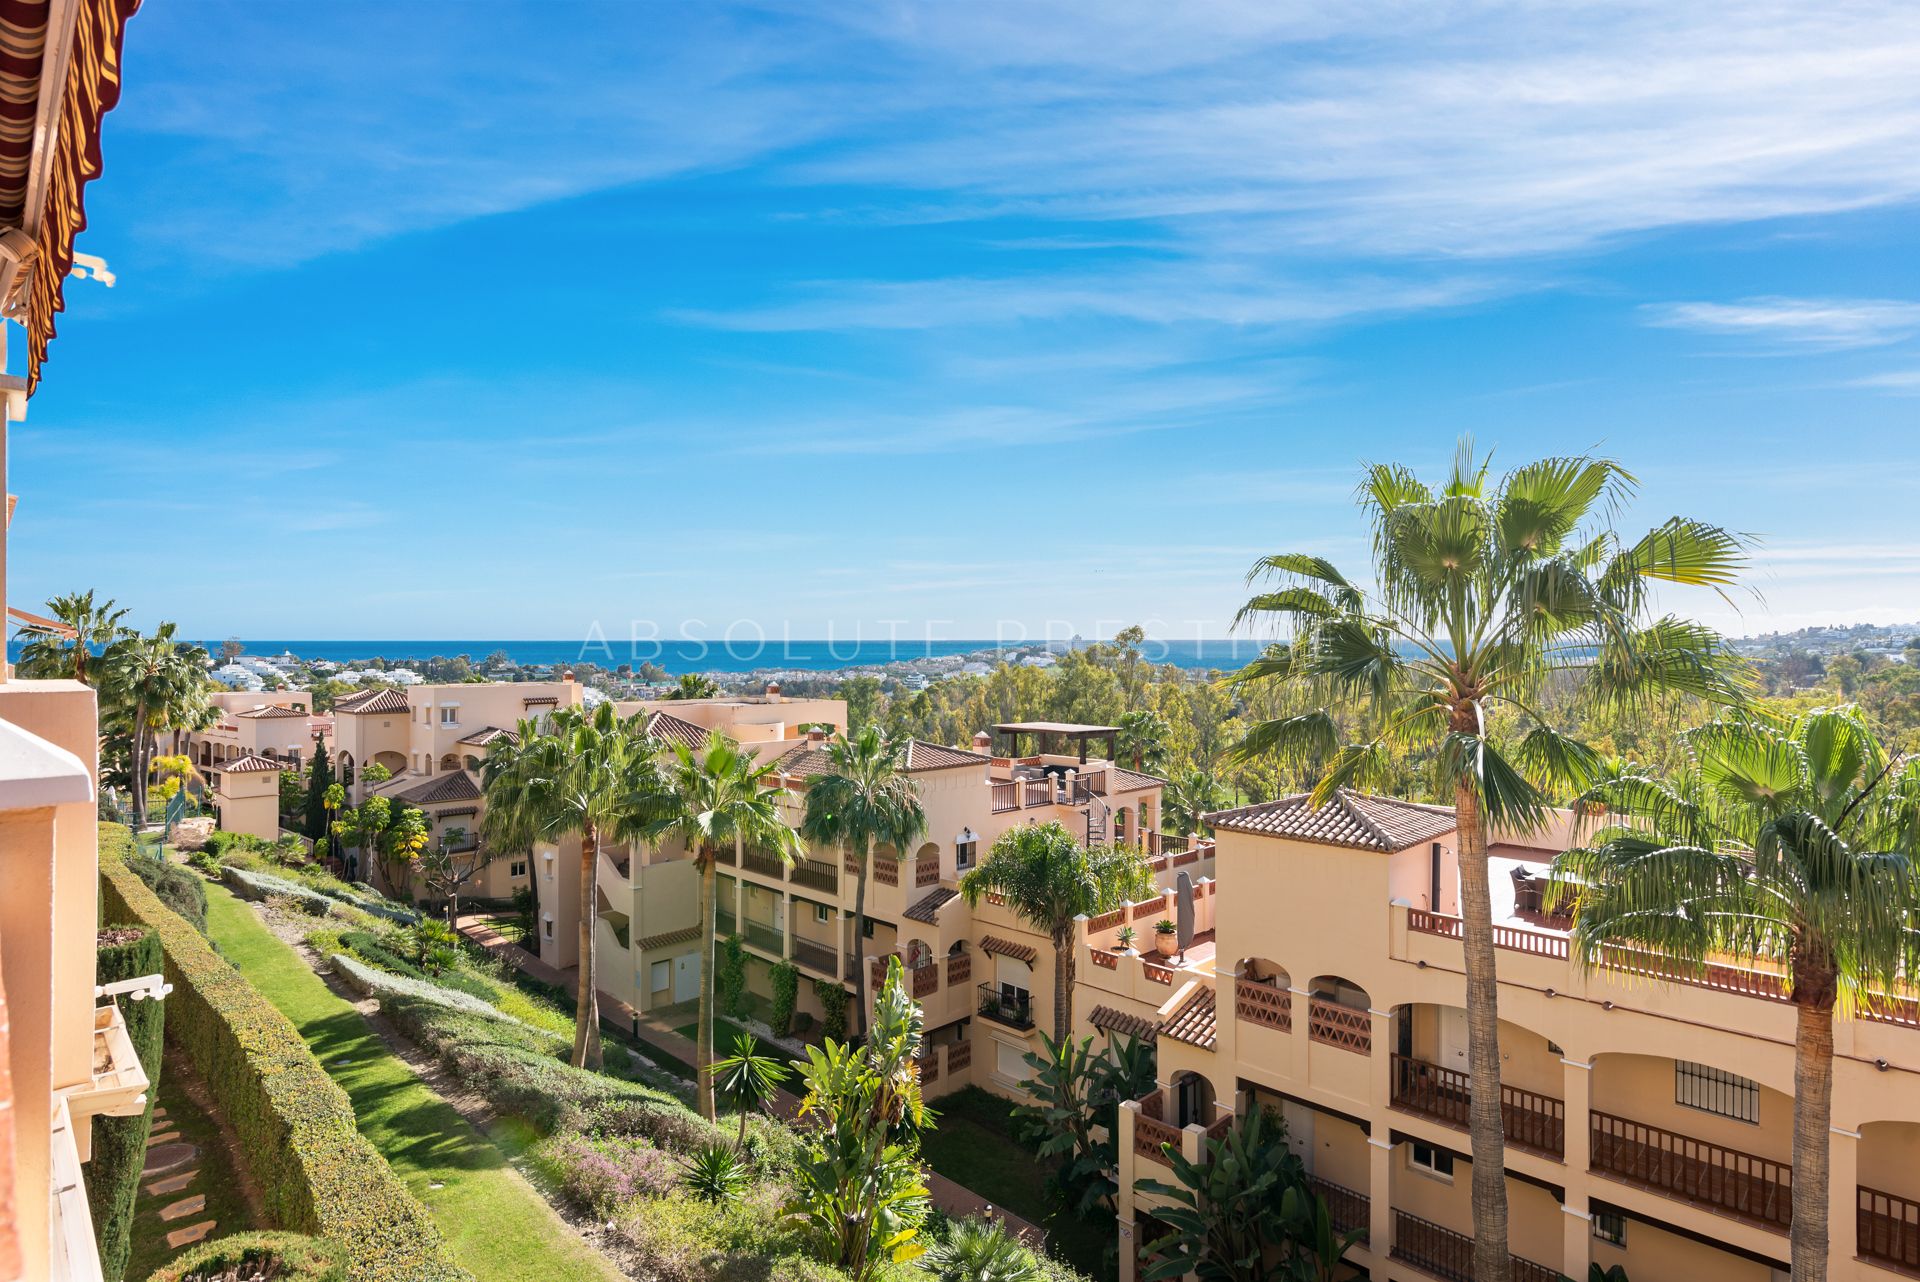 2-BEDROOM APARTMENT WITH STUNNING MEDITERRANEAN VIEWS FOR SALE IN ESTEPONA